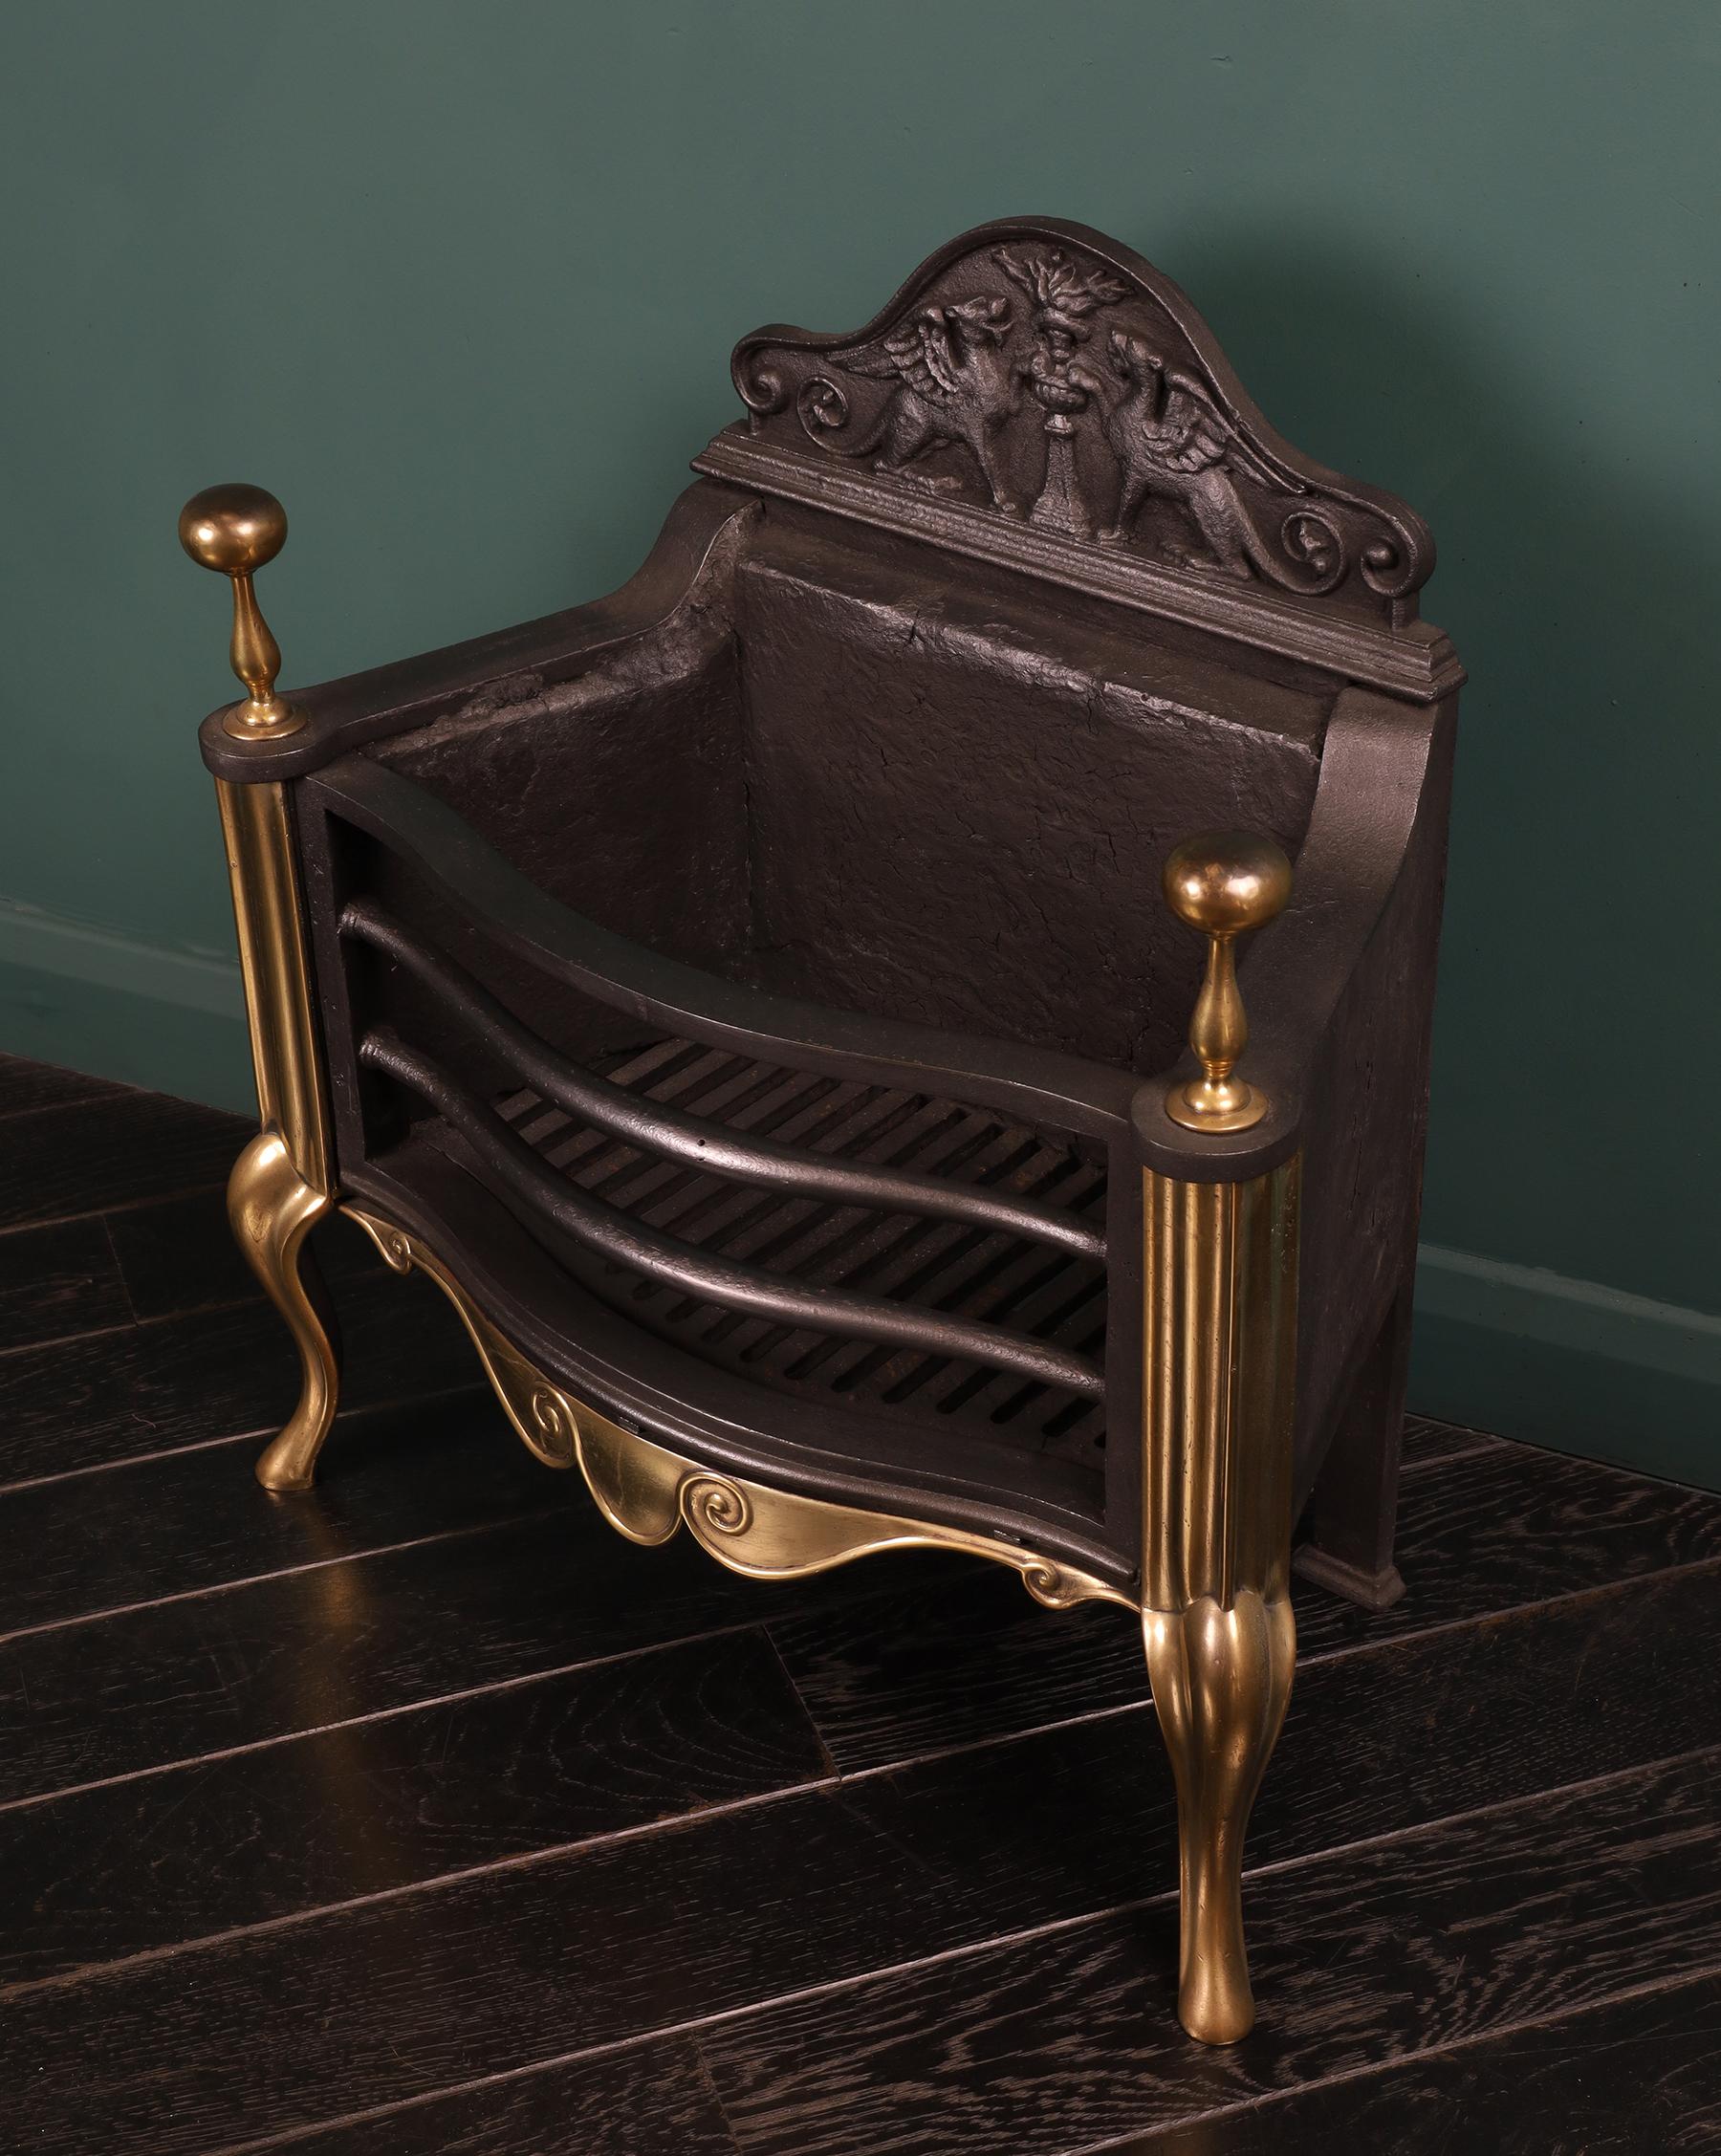 A polished brass and iron fire basket (by Thomas Elsley of London), with scrolled fret between shaped cabriole legs in the Queen Anne manner. Cast-iron shaped front bars with elegant ball finials uppermost and an ornate back plate. Height of burning